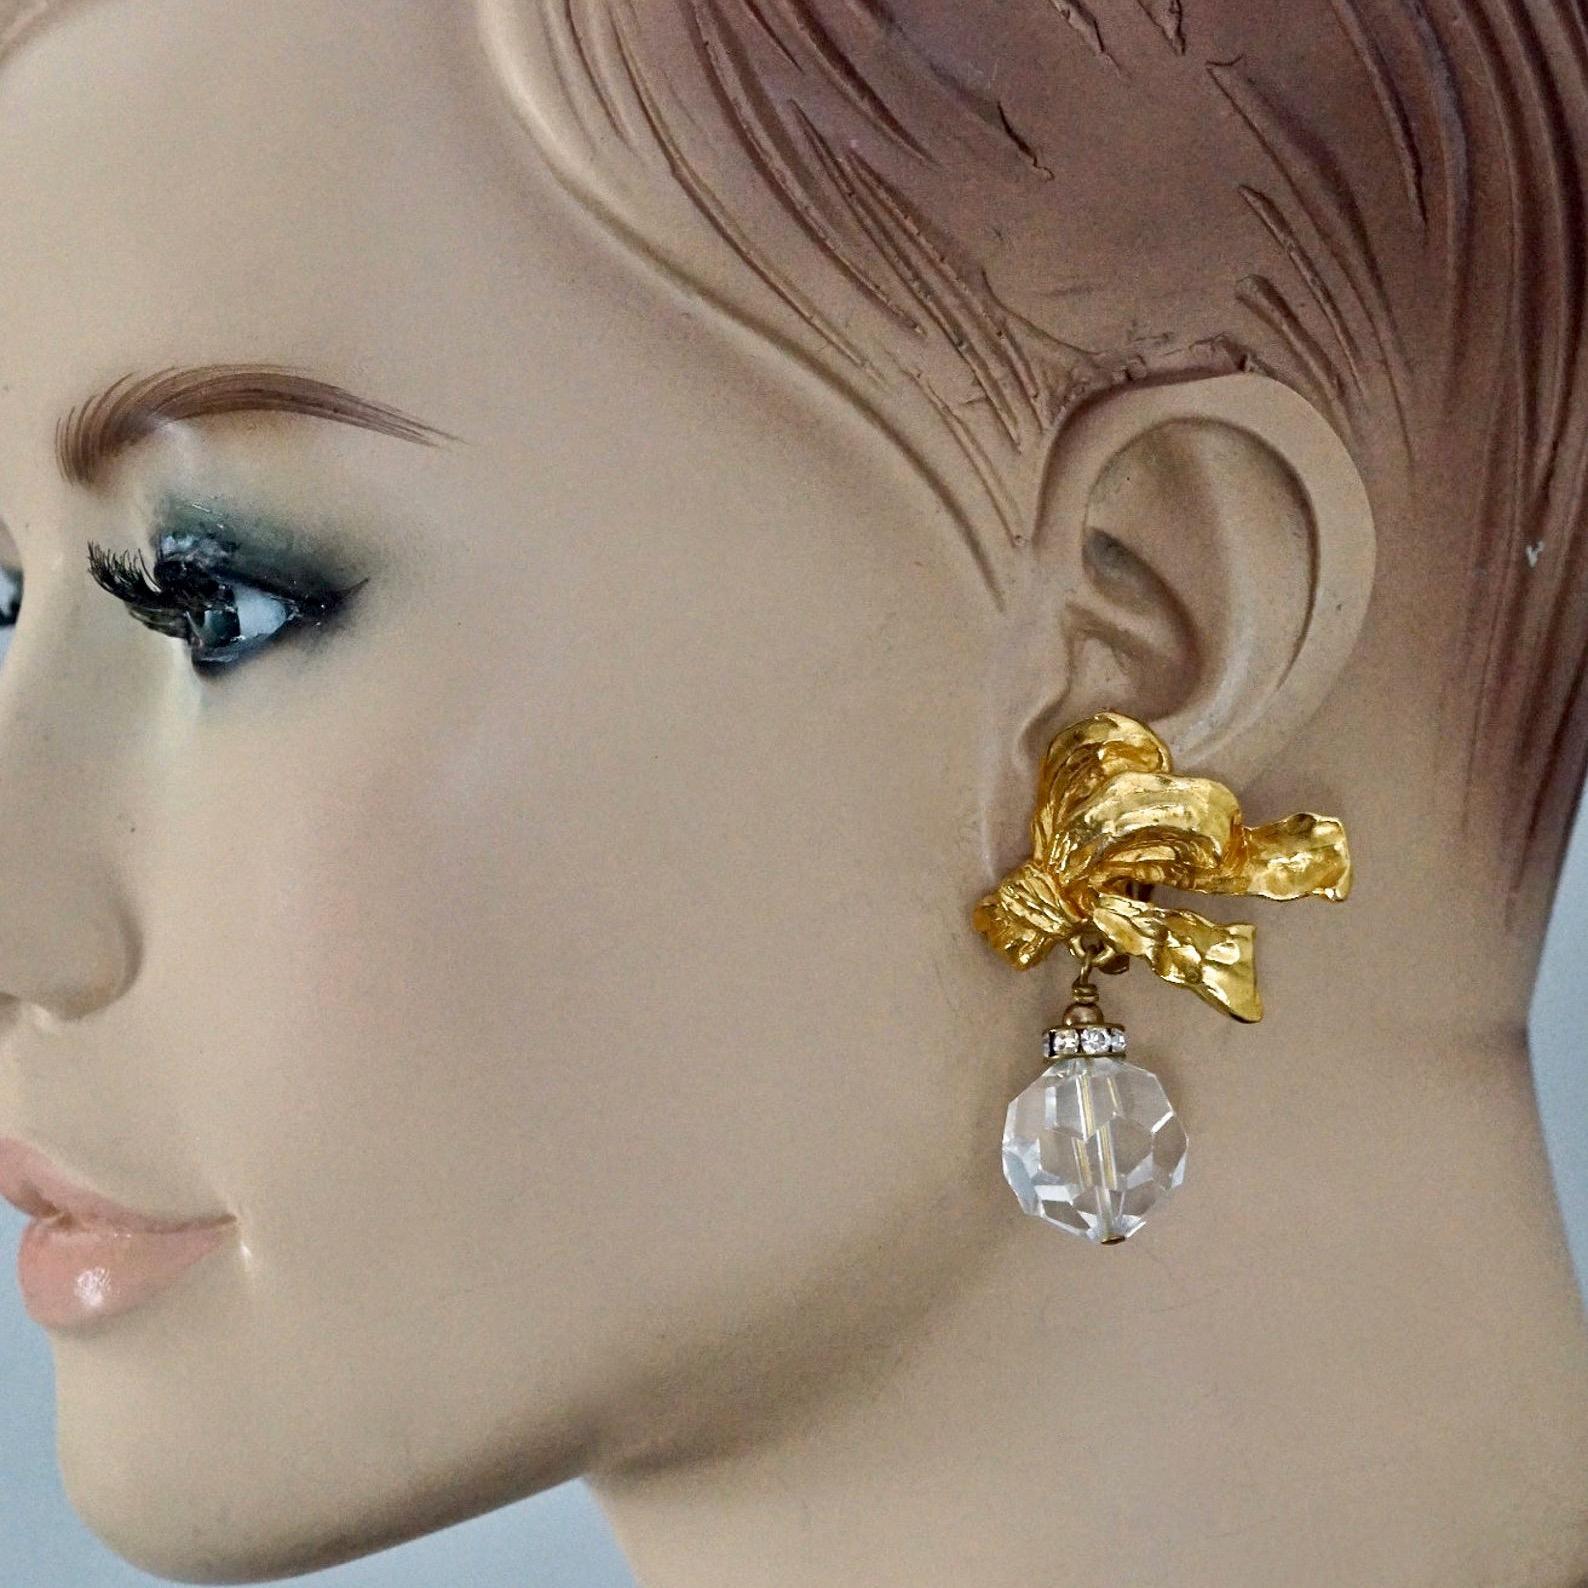 Vintage CHRISTIAN DIOR BOUTIQUE French Bow Faceted Bead Earrings

Measurements:
Height: 1.96 inches (5 cm)
Width: 1.45 inches (3.7 cm)
Weight per Earring: 20 grams

Features:
- 100% Authentic CHRISTIAN DIOR BOUTIQUE.
- French bow with dangling